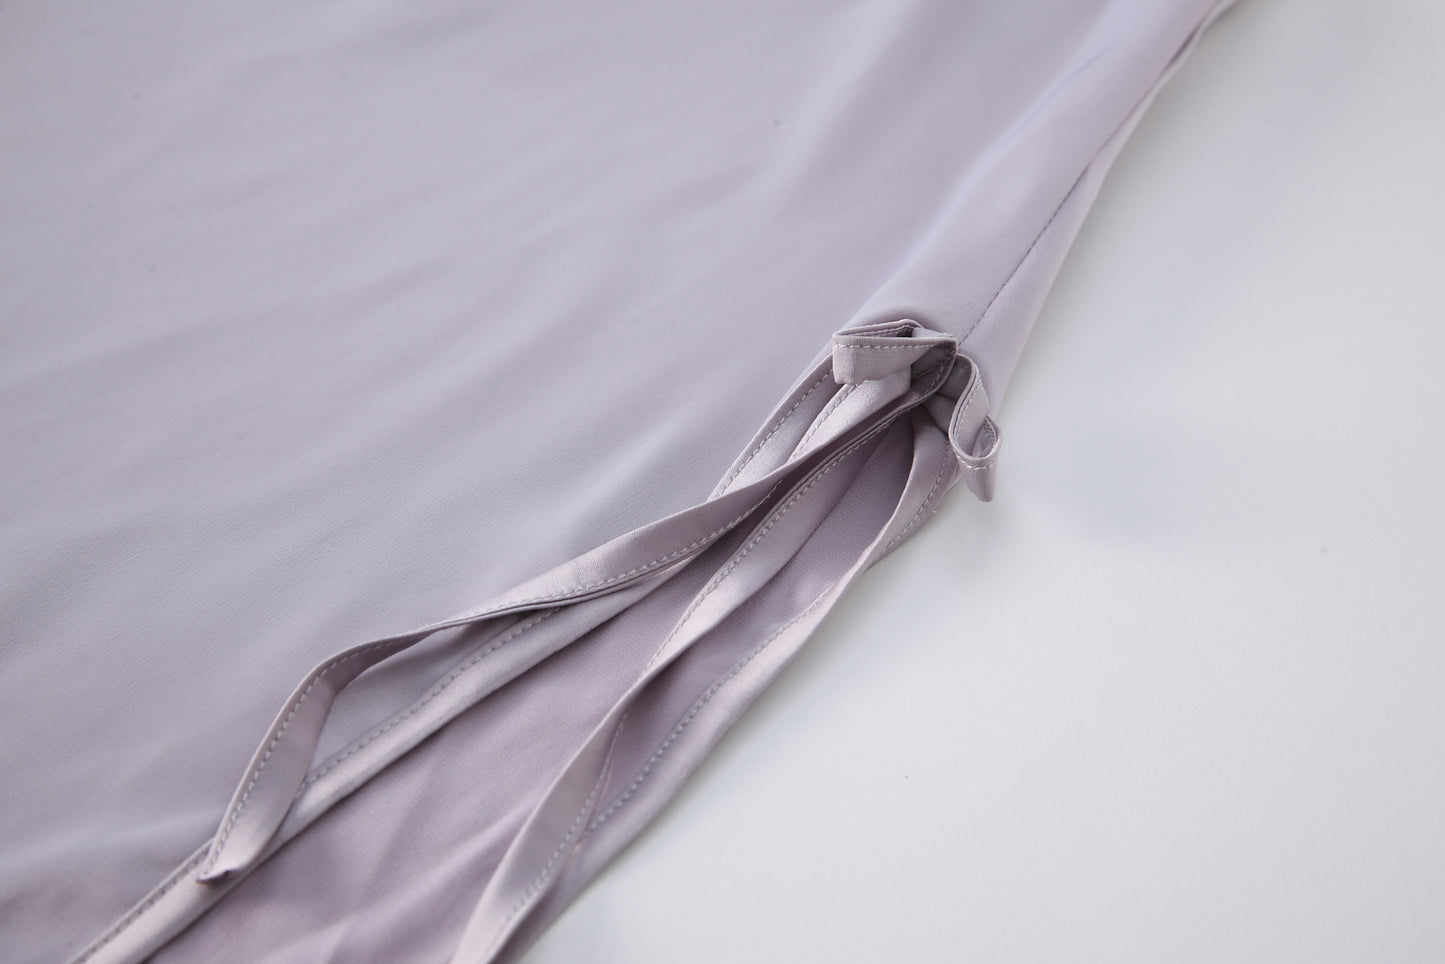 Close-up of the hem and ribbon details of a light purple silk nightgown, showcasing the elegant fabric and craftsmanship.